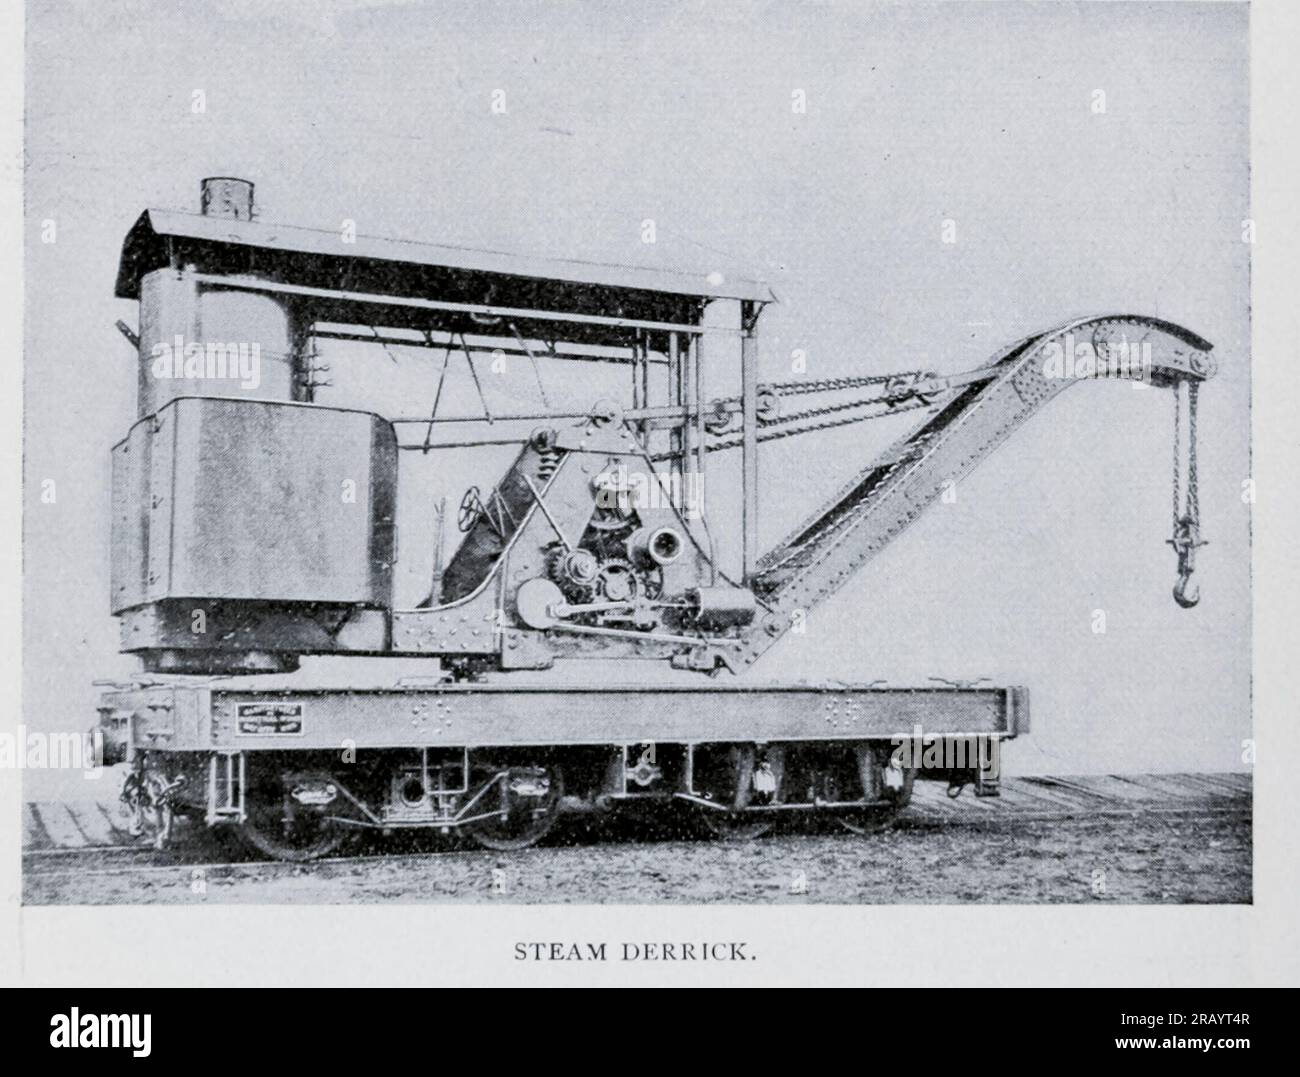 Steam Derrick from the Article RAILROAD ACCIDENT AND EMERGENCY SERVICE. By W. L. Derr. from The Engineering Magazine DEVOTED TO INDUSTRIAL PROGRESS Volume X October 1896 NEW YORK The Engineering Magazine Co Stock Photo